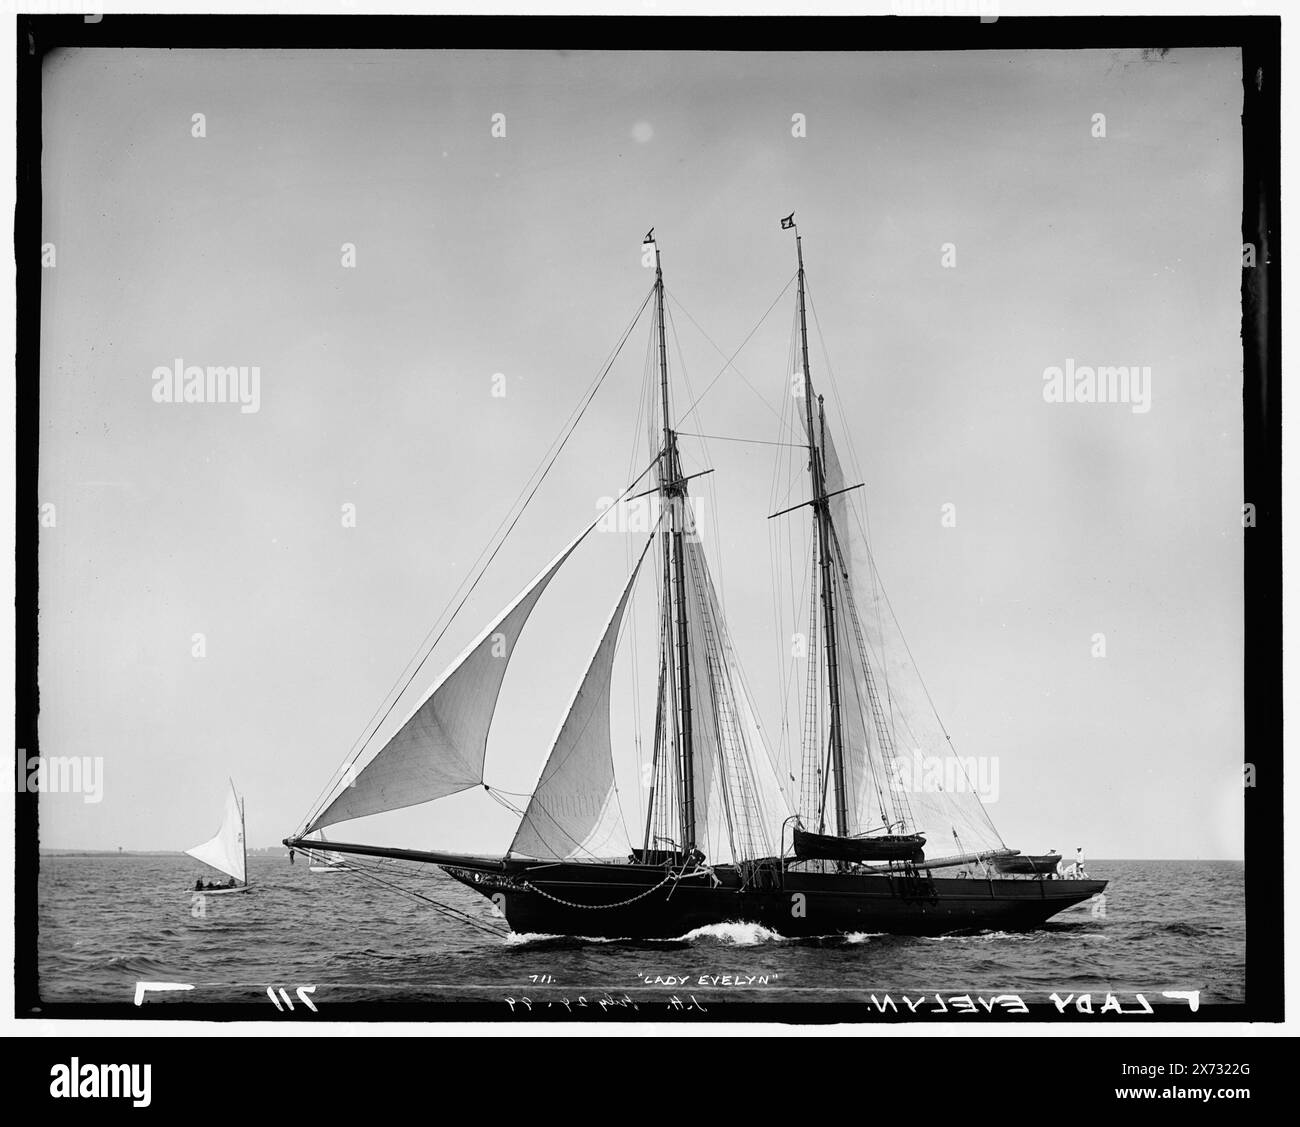 Lady Evelyn, Attribution based on style of title and numbering., Probably Indian Harbor Yacht Club., '711' and 'I.H.' on negative., No Detroit Publishing Co. no., Gift; State Historical Society of Colorado; 1949,  Lady Evelyn (Schooner) , Yachts. Stock Photo